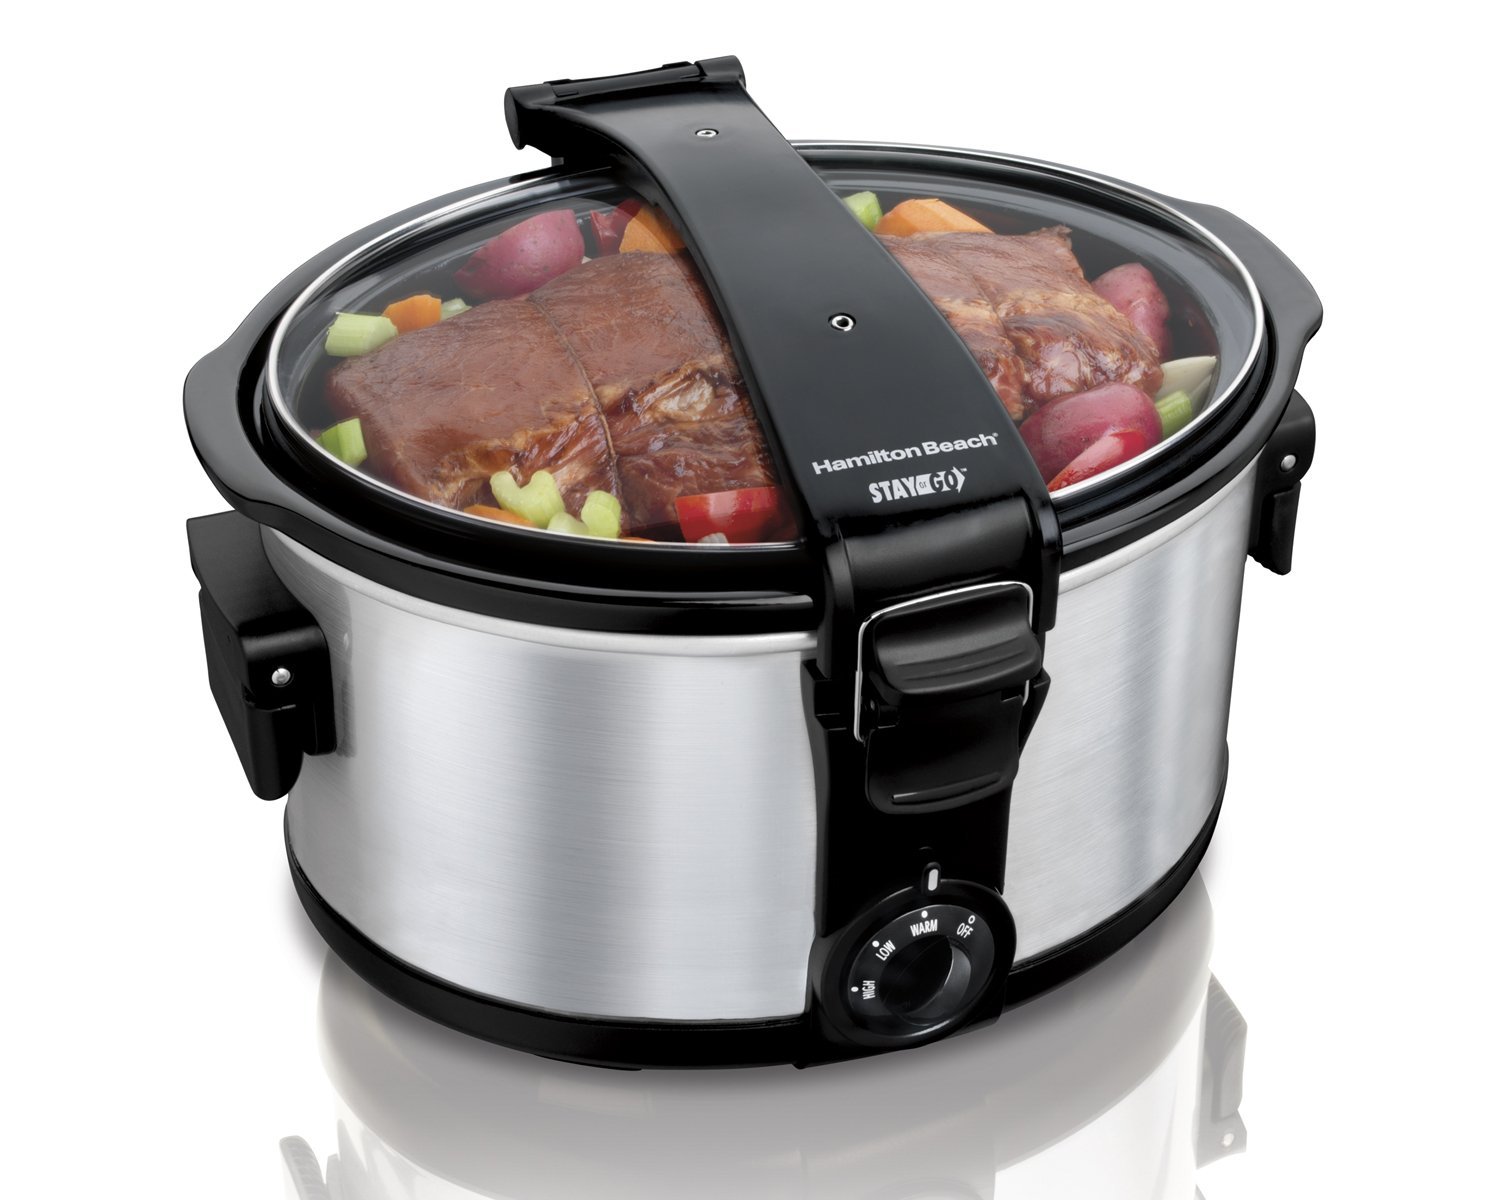 Hamilton Beach 7 Quart Stay or Go Slow Cooker is awesome for bone broths and so many meals. Click image to purchase this slow cooker from the Fluffy's trusted Amazon partner.